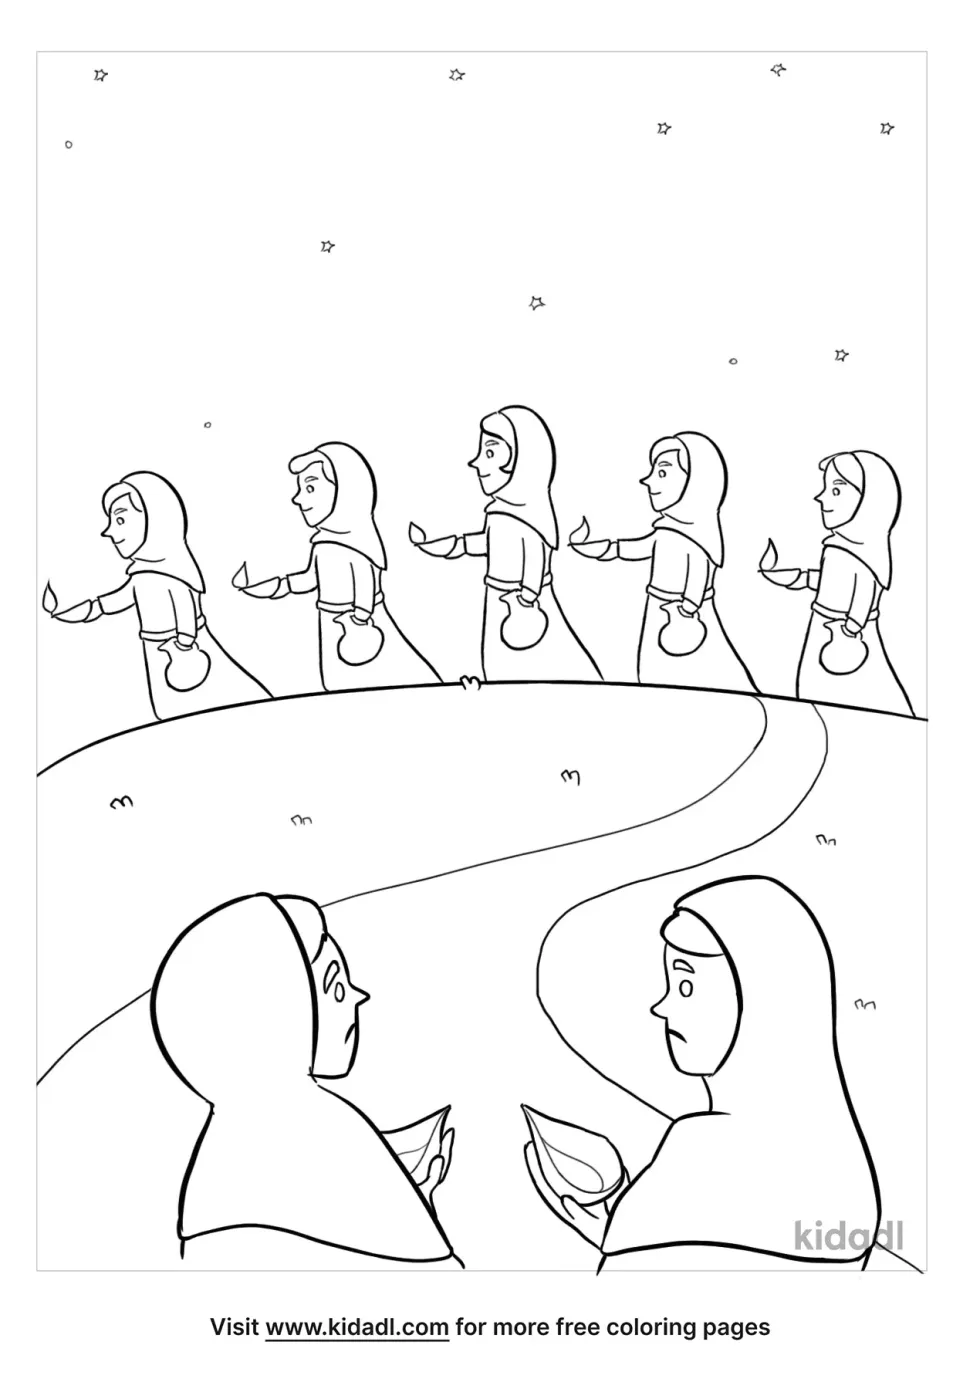 Parable Of The Ten Virgins Coloring Page